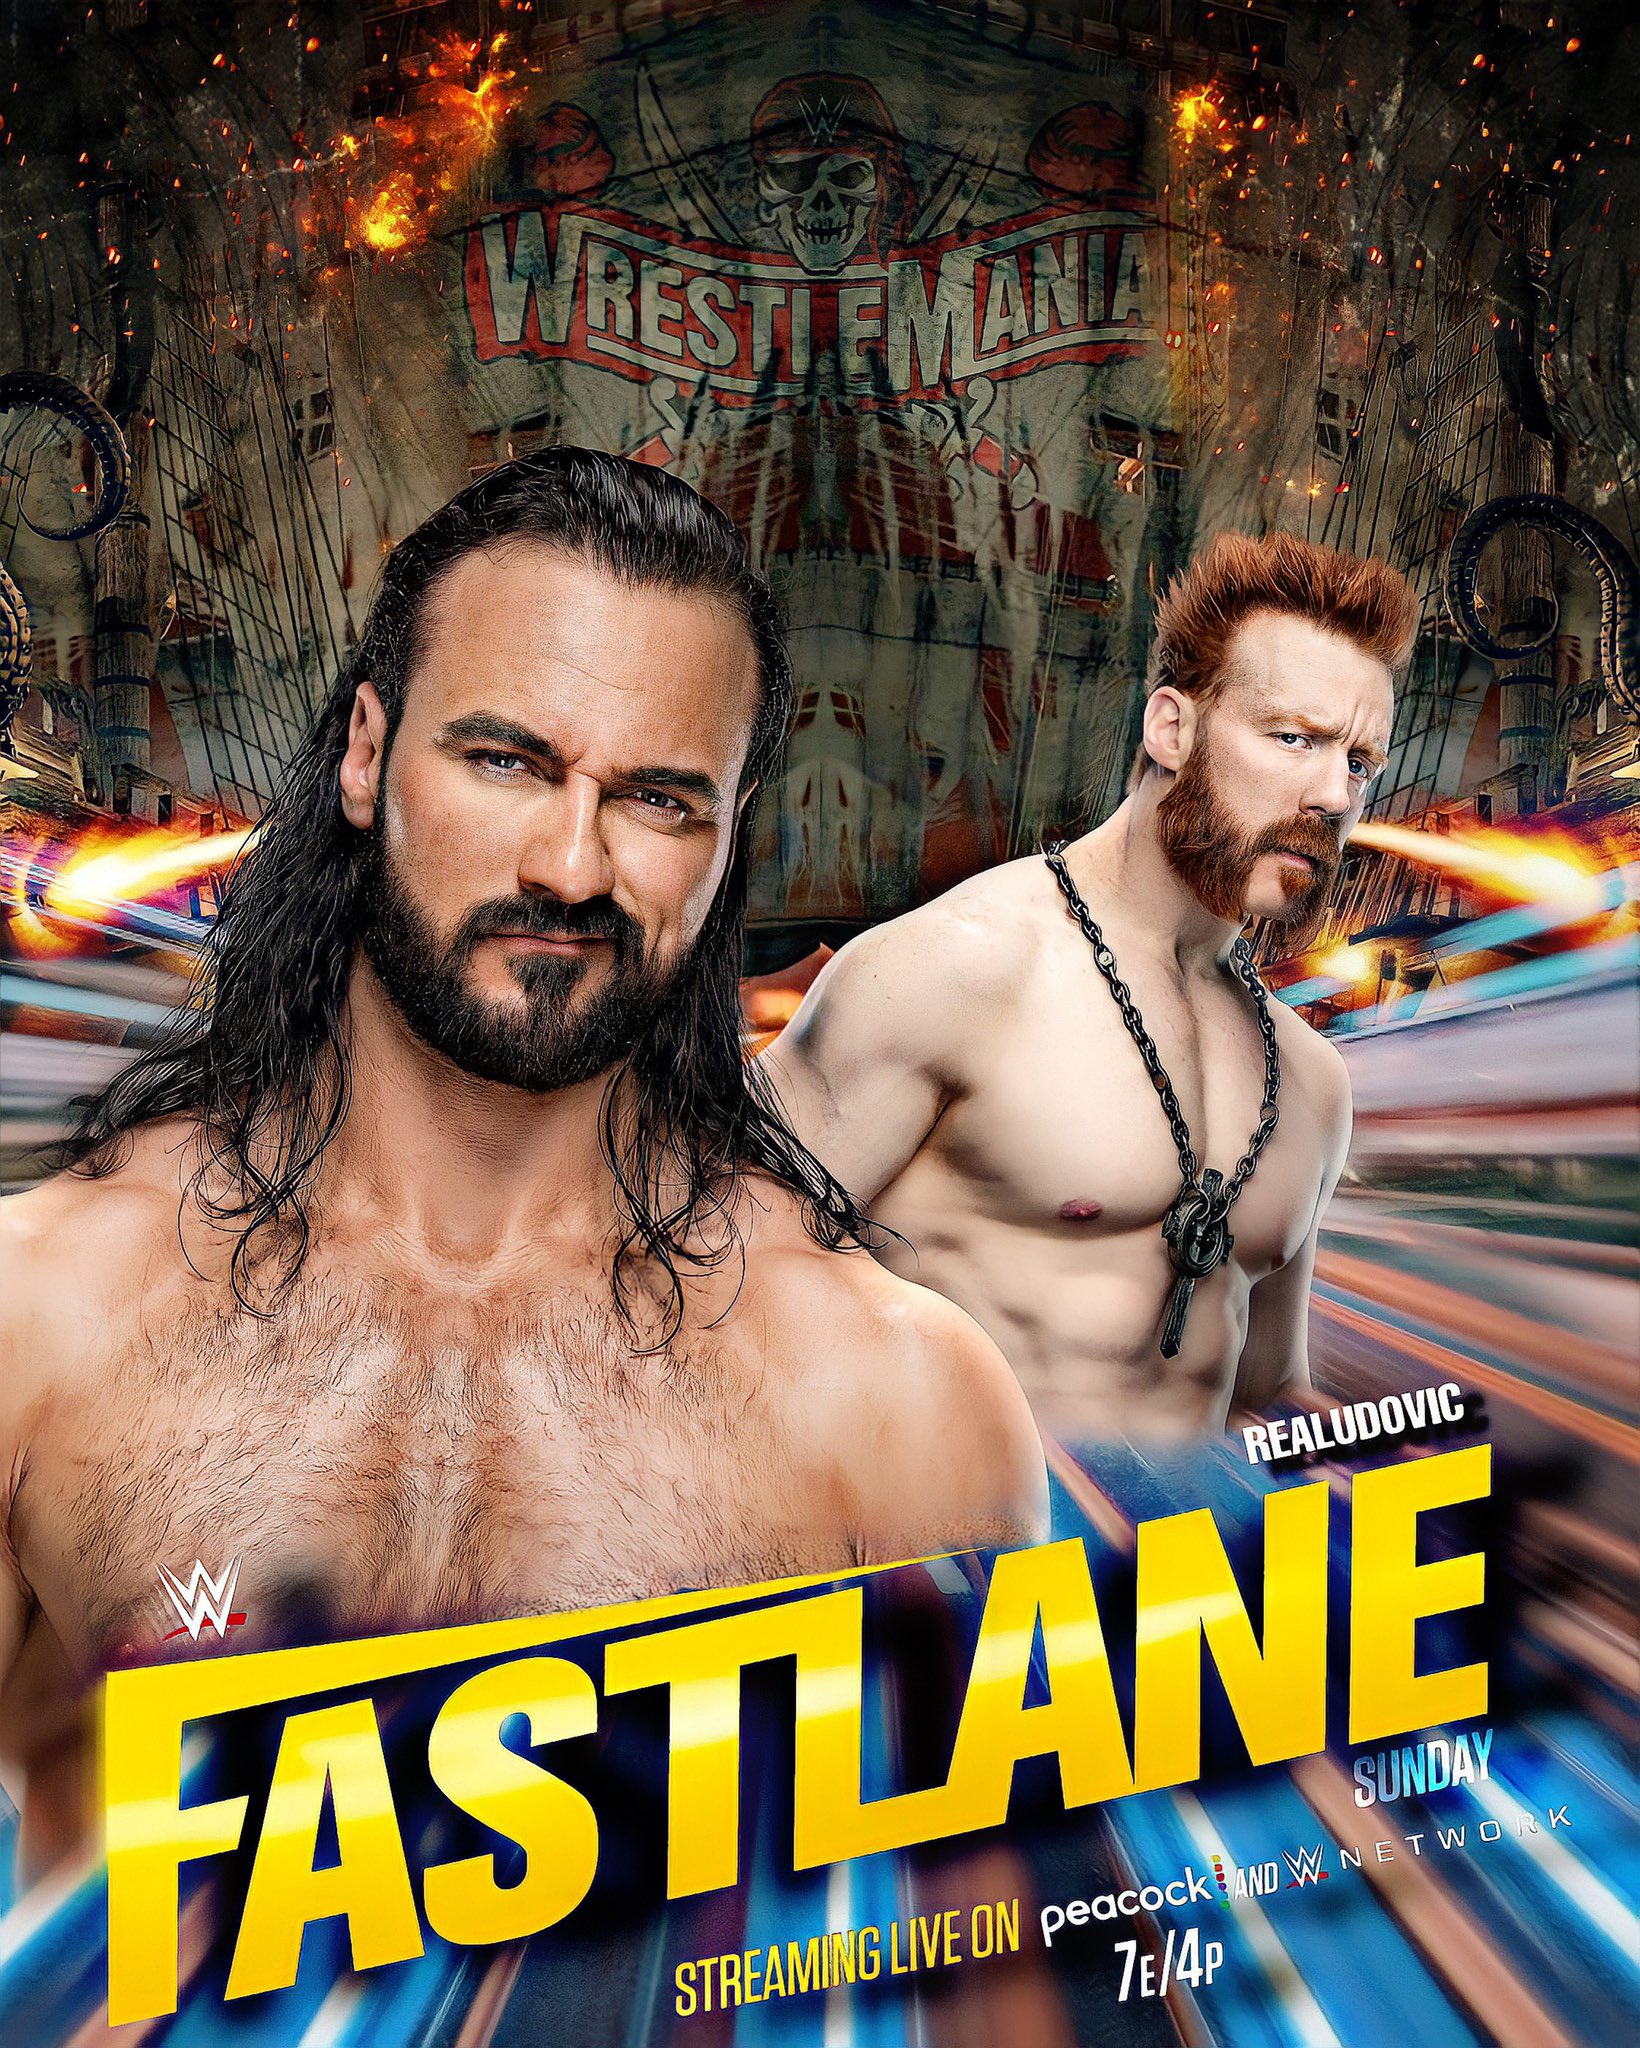 WWE Fastlane 22nd March Live All you need to know for tonight’s special